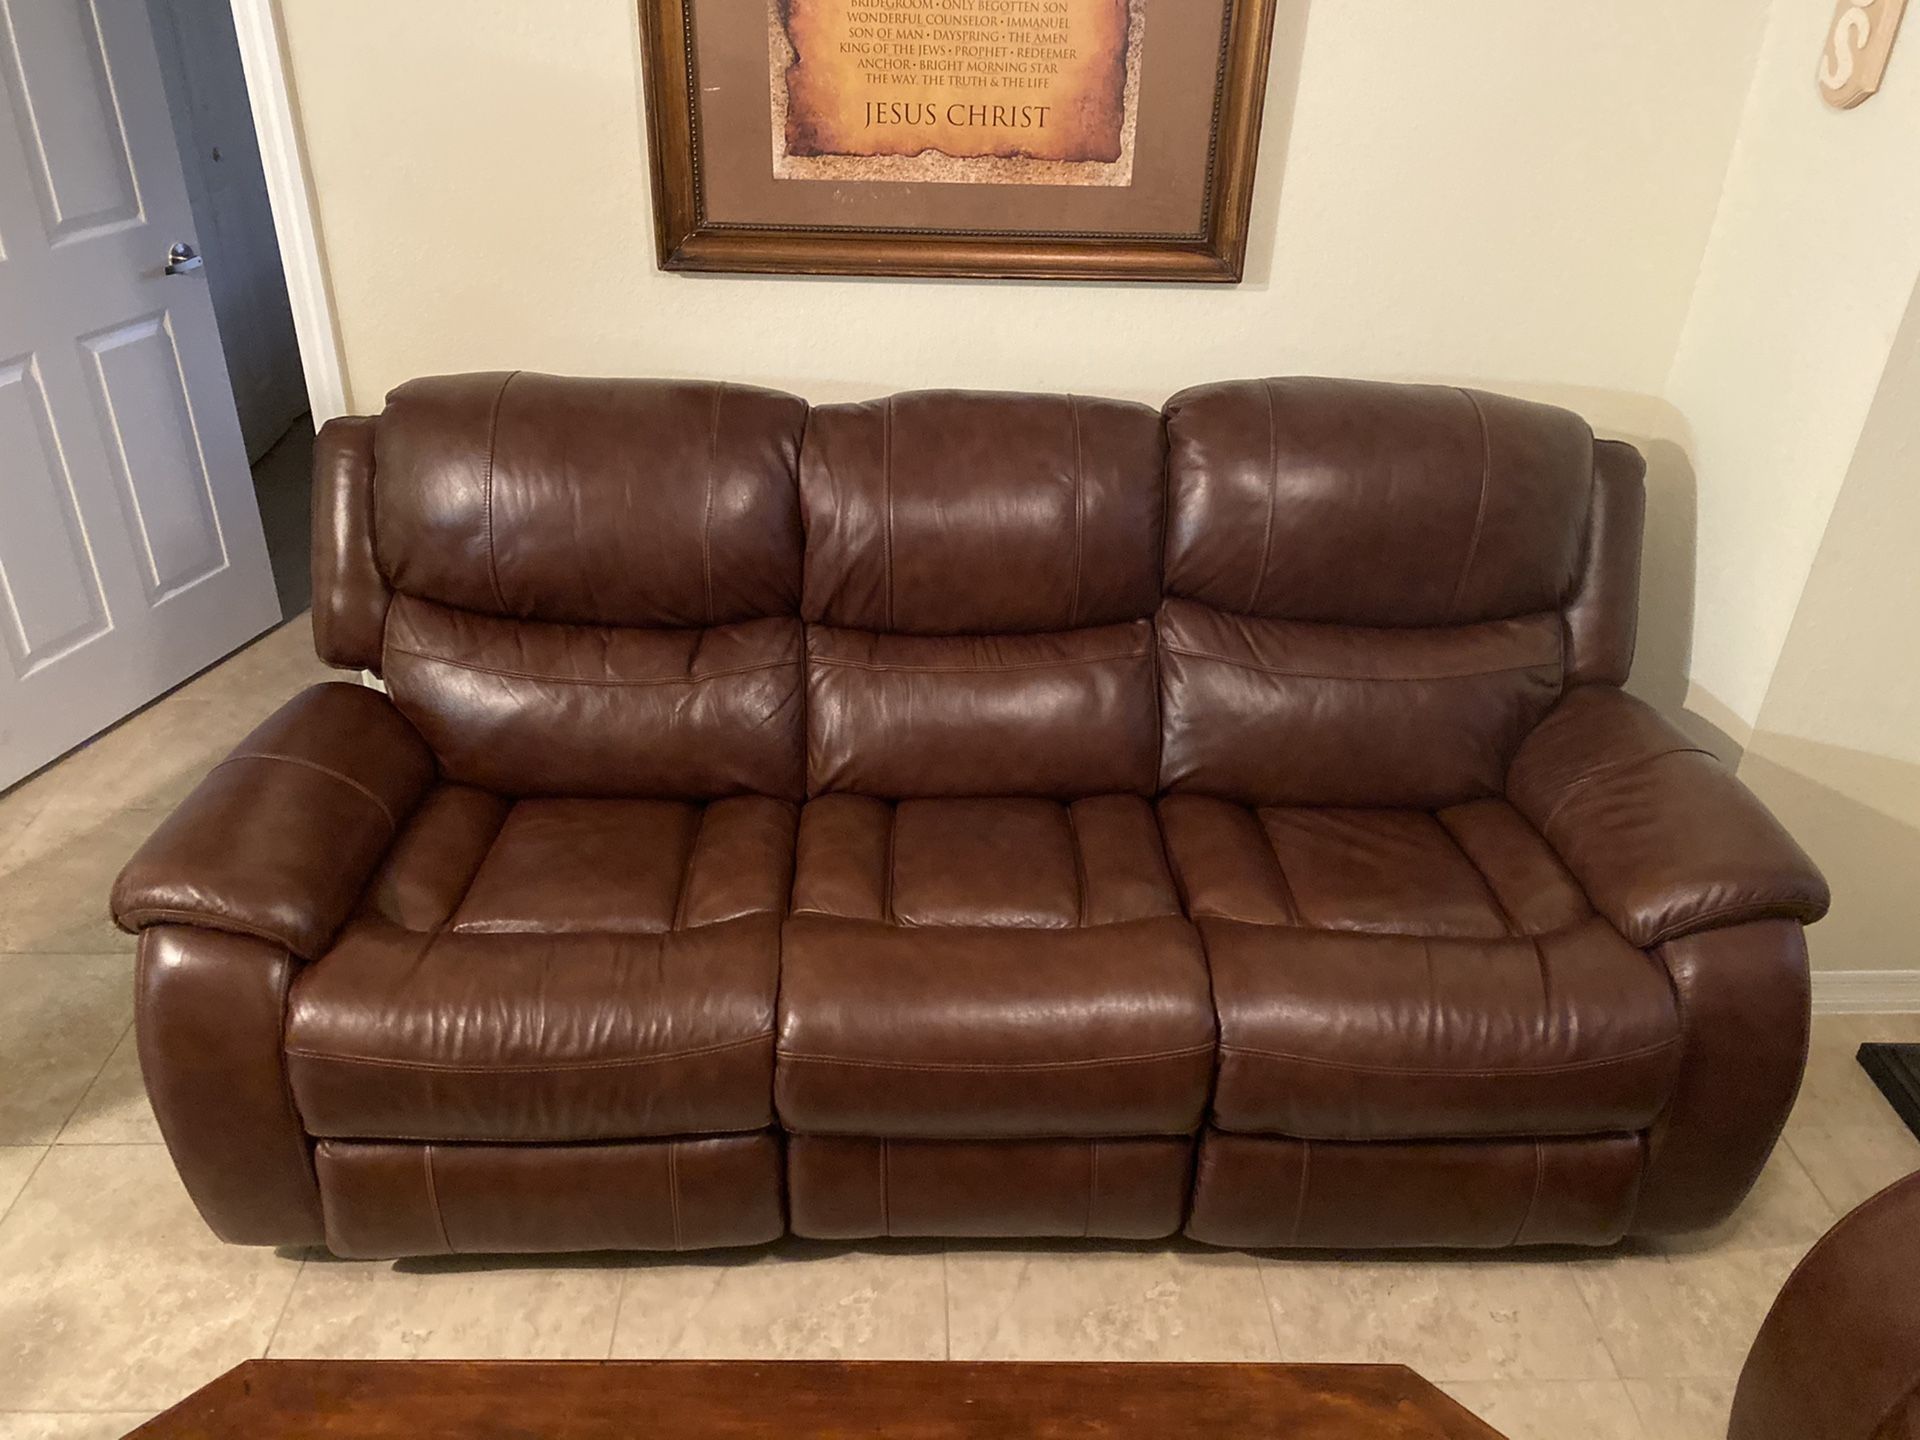 Leather Recliner Sofas NEW - EL Dorado Cindy Crawford leather powered & manual recliner sofa set of 2